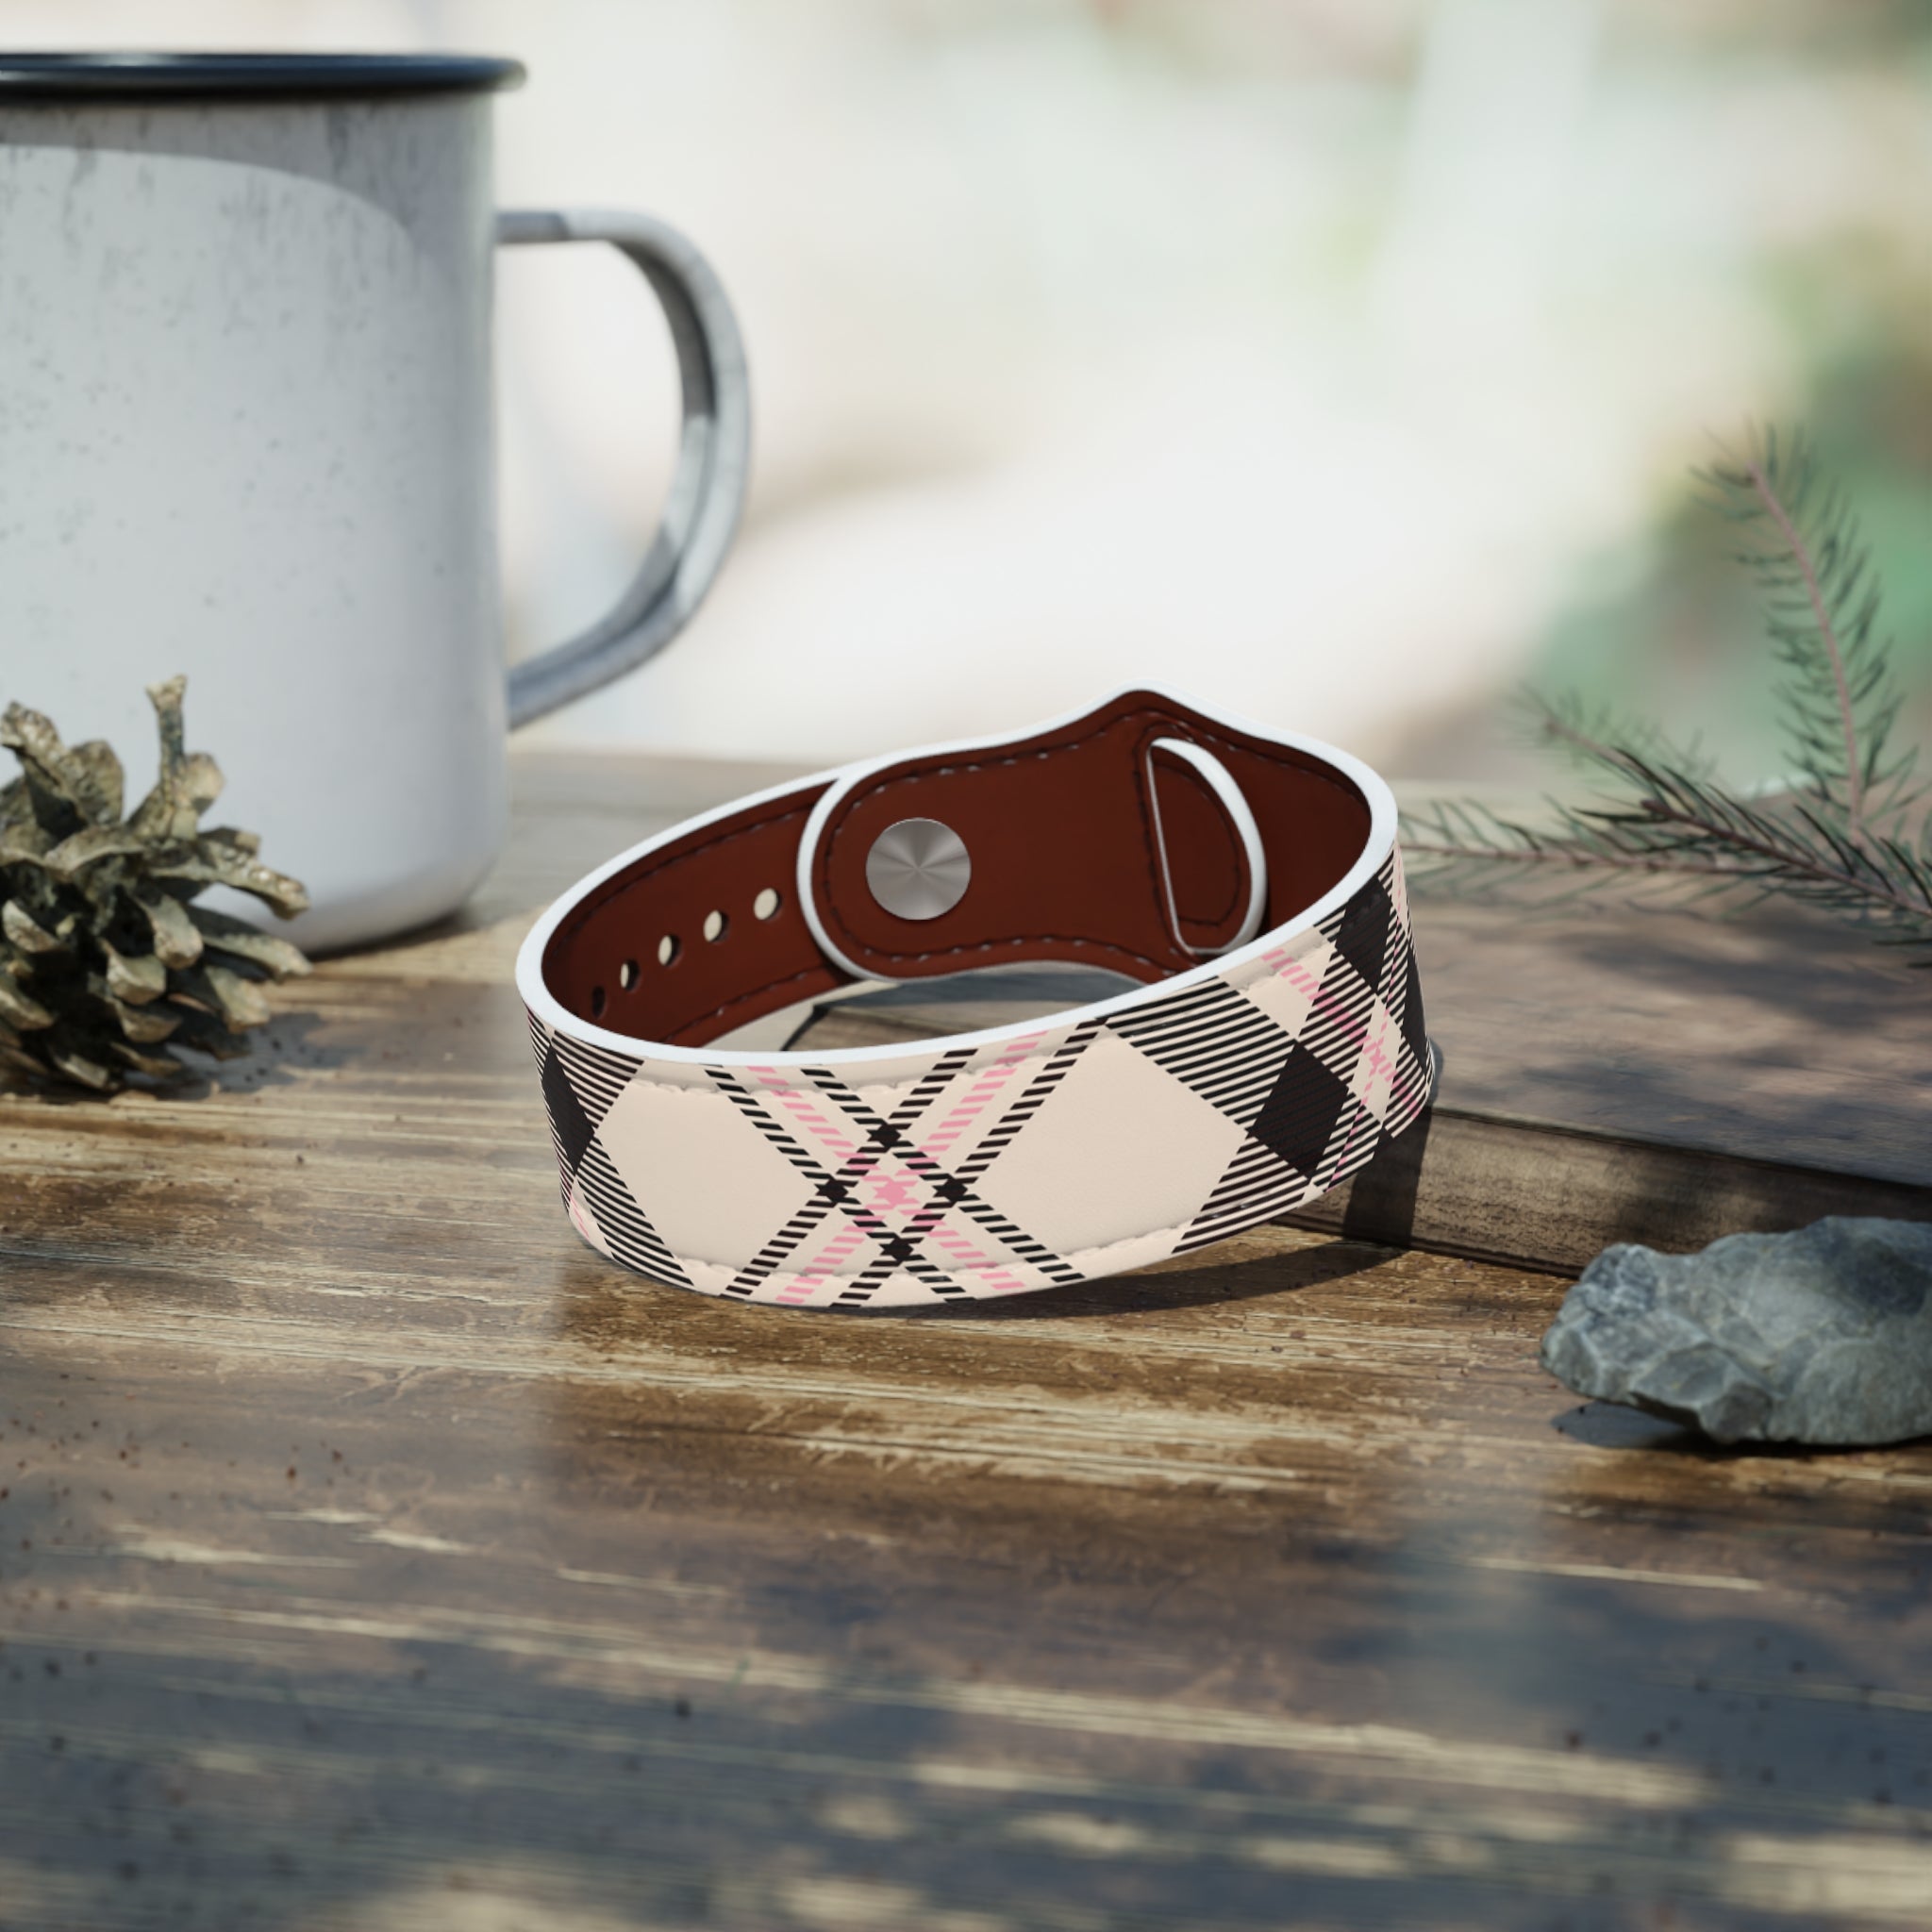 Abby Plaid in Beige and Pink Faux Leather Wristband, Leather Bracelet, Faux Leather Cuff, Unisex Accessories